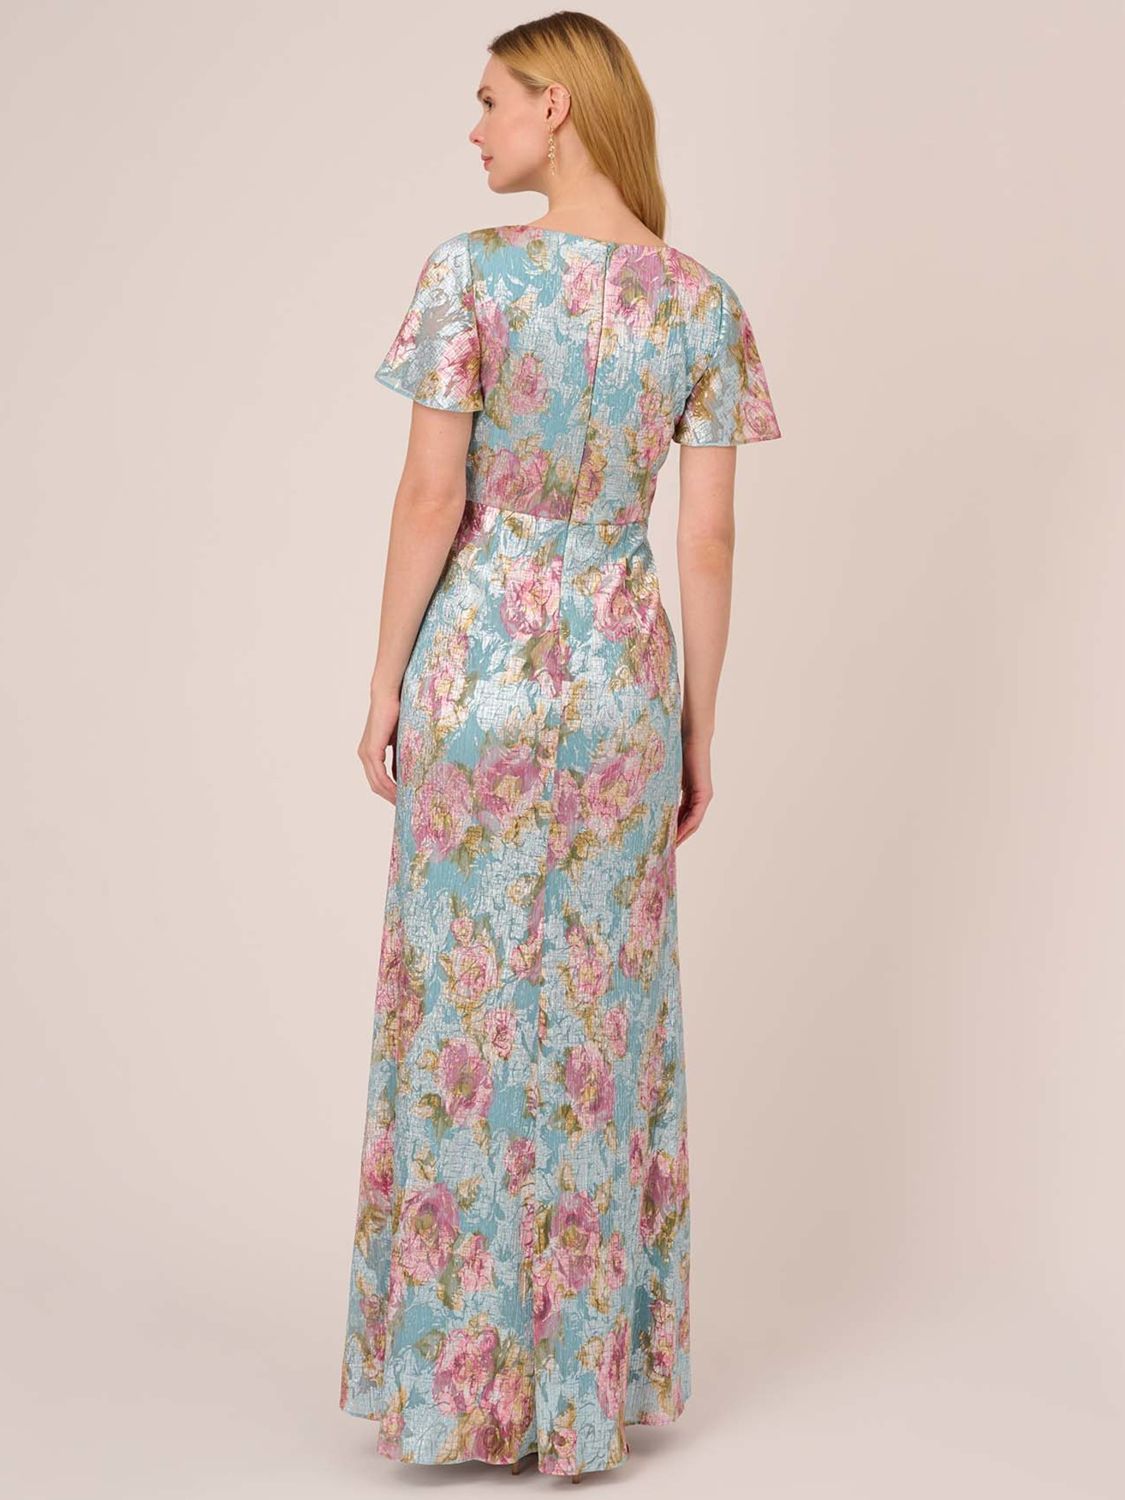 Adrianna Papell Foiled Mesh Floral Maxi Dress, Mint/Multi at John Lewis ...